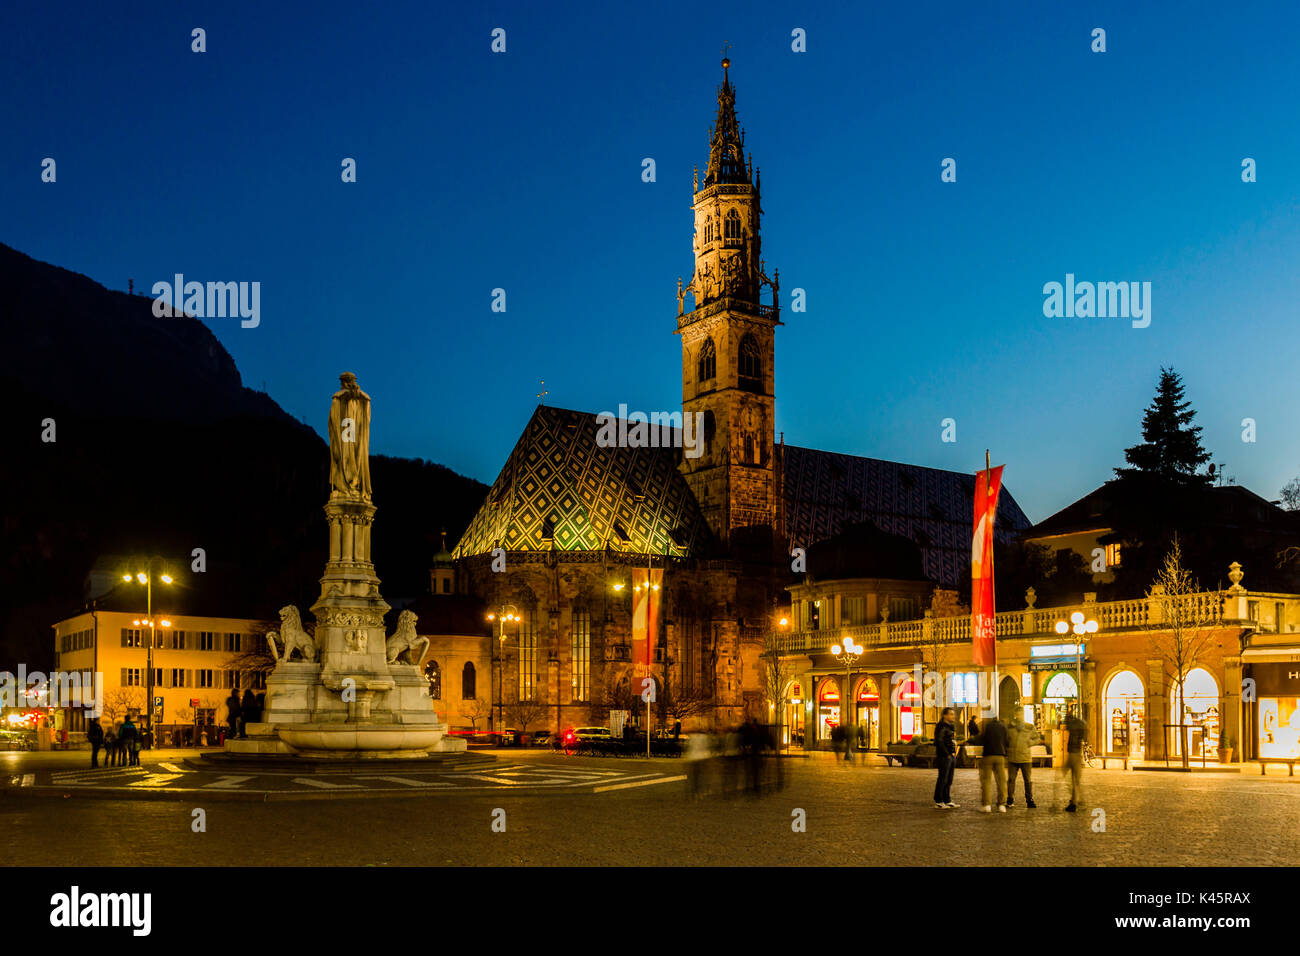 Cathedral, Bolzano, Province of Trentino Alto Adige, Italy. Evening light in Piazza Walther. Stock Photo